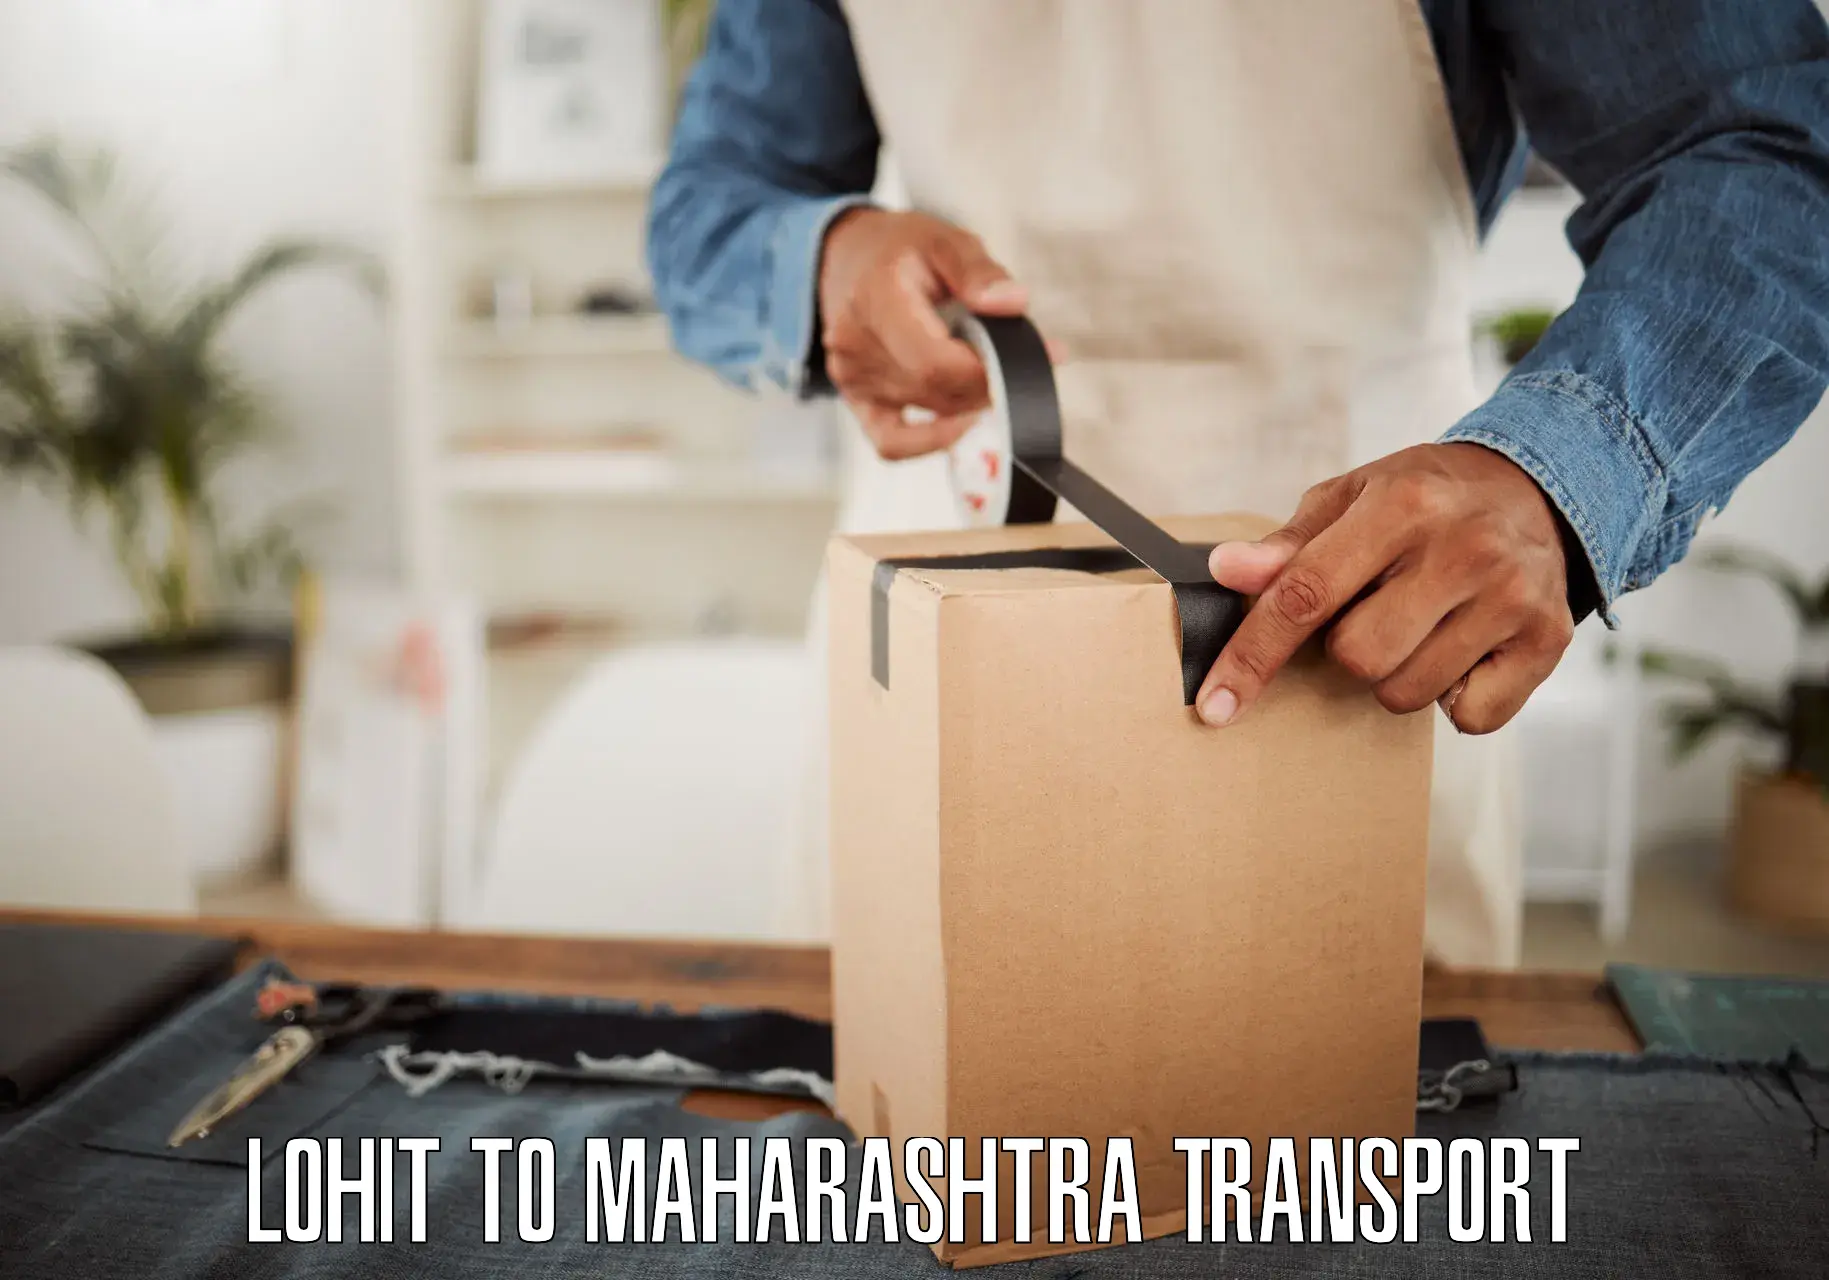 Vehicle transport services Lohit to Greater Thane